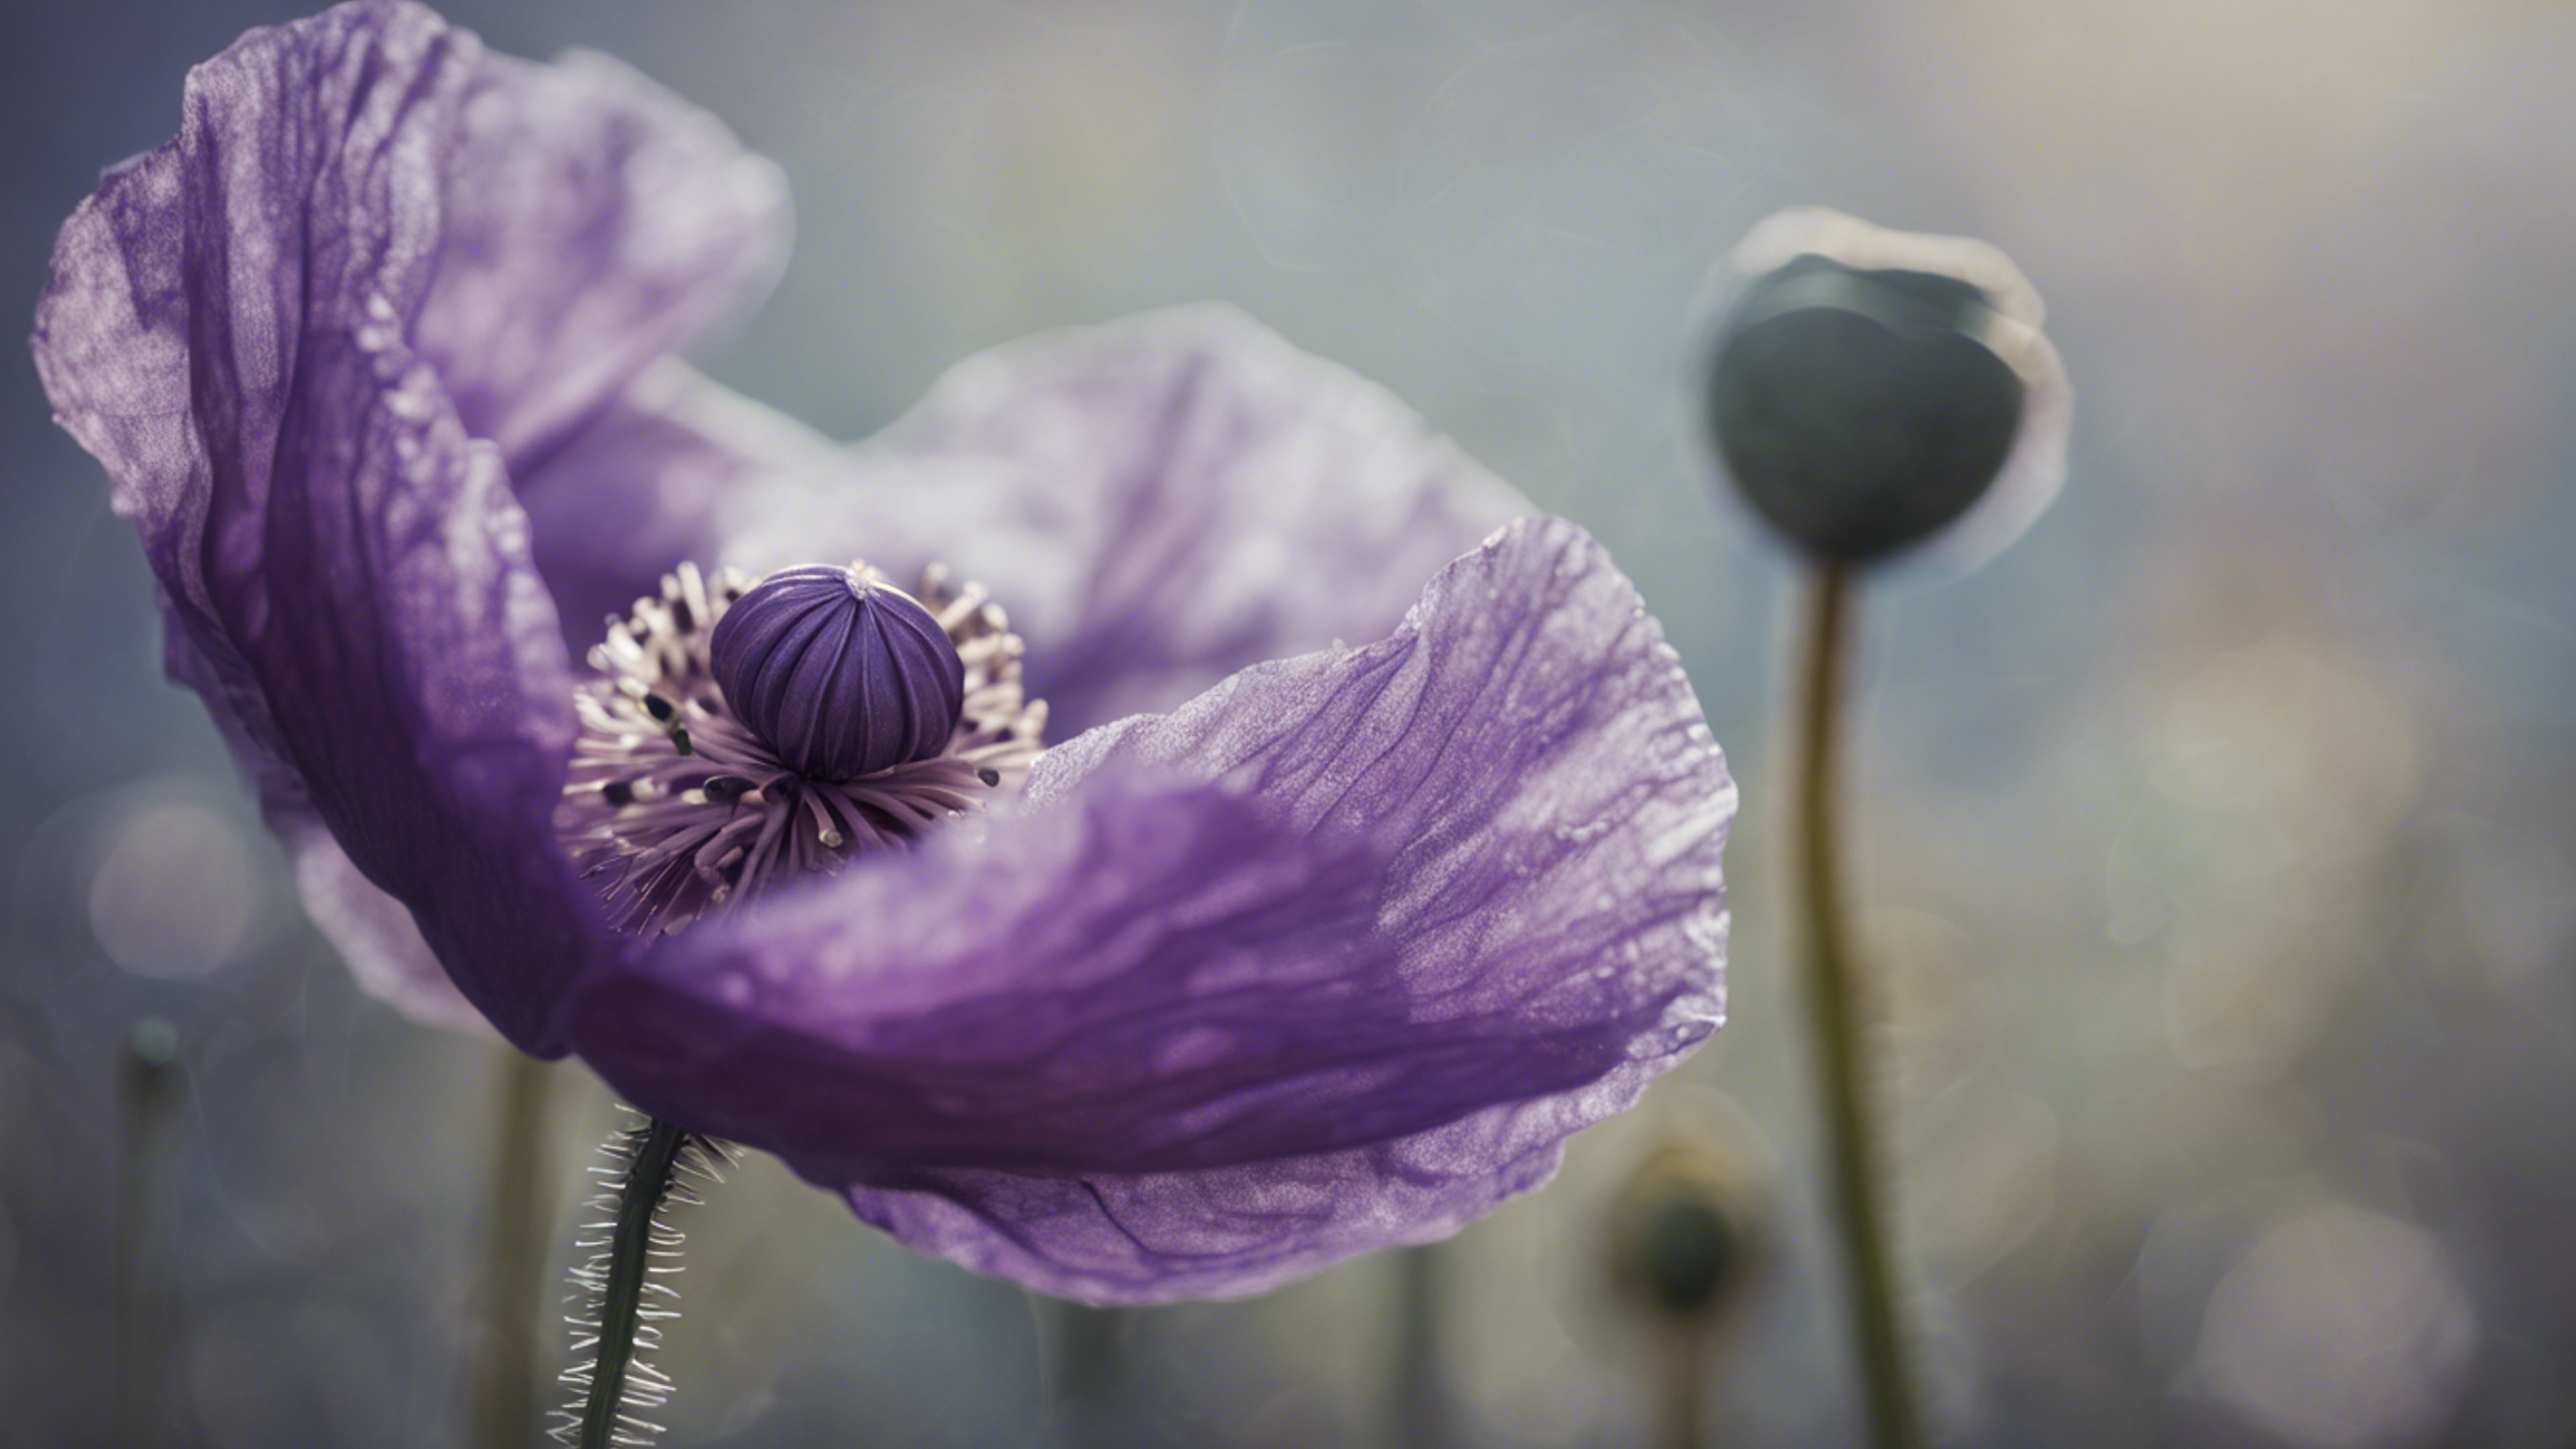 A close-up of a purple poppy with intricate details on a textured canvas. Fond d'écran[f5d07fa5408f4773ae7b]